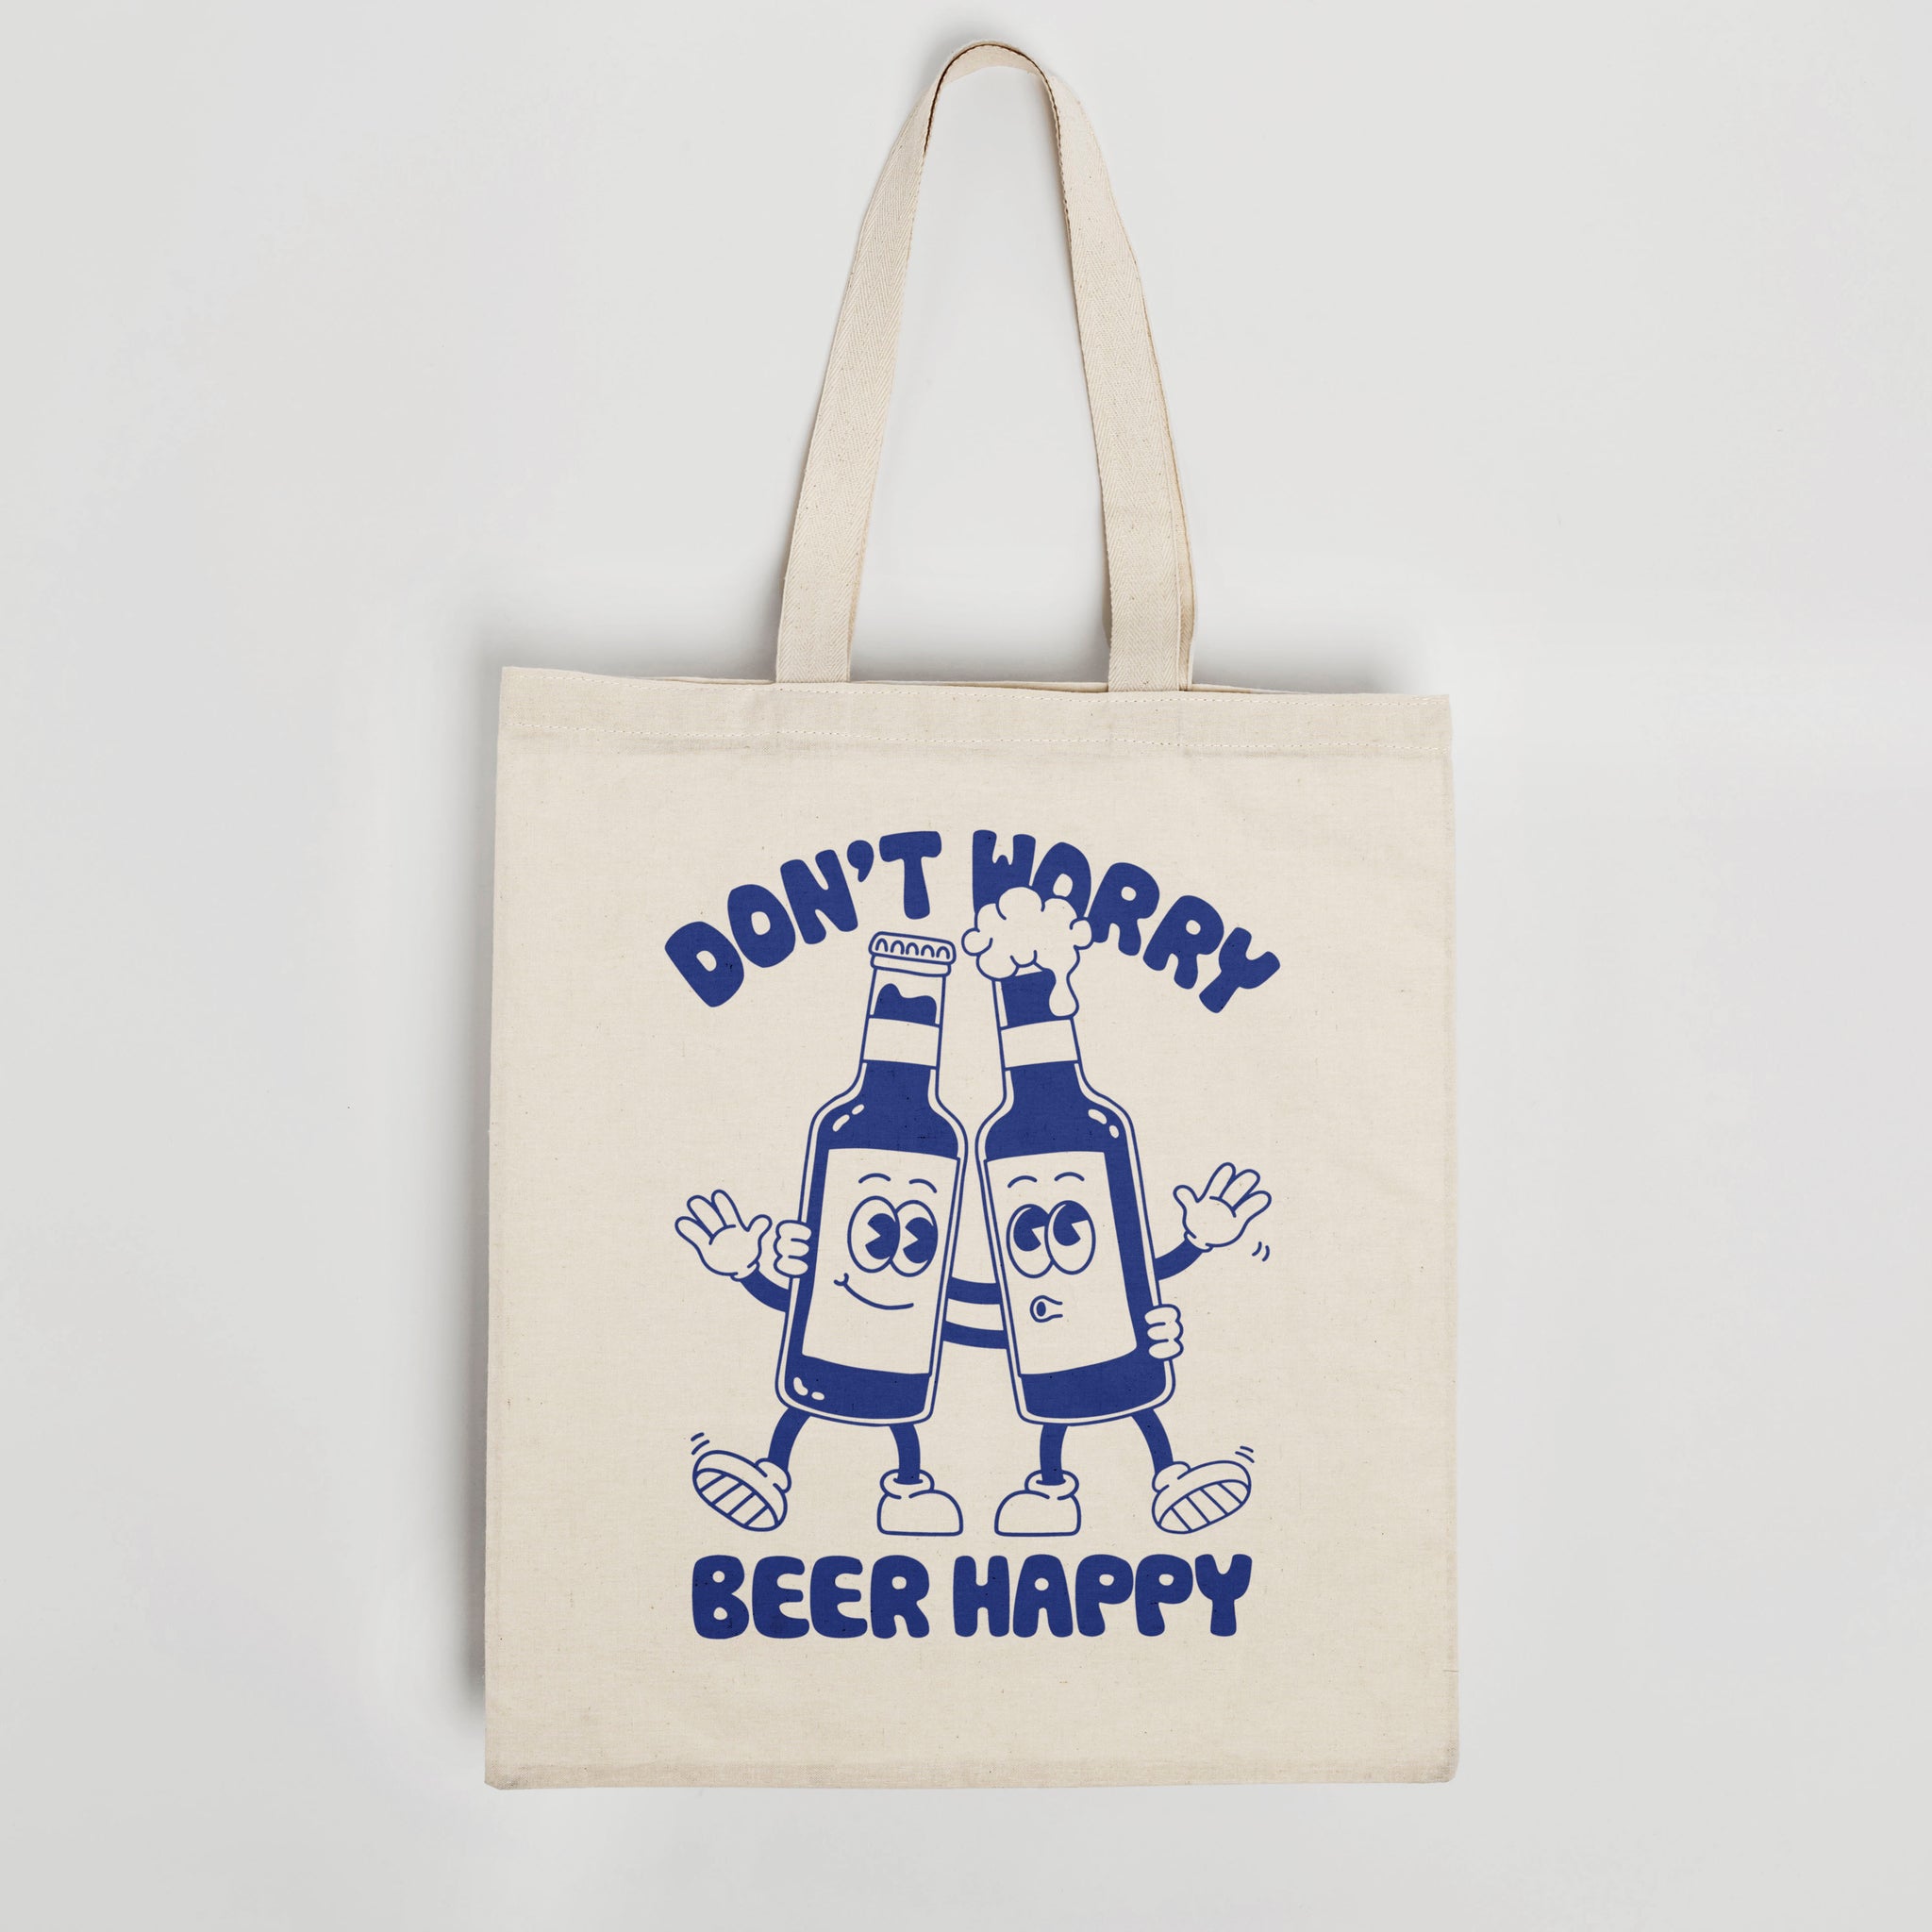 'Don't Worry Beer Happy' organic cotton canvas tote bag